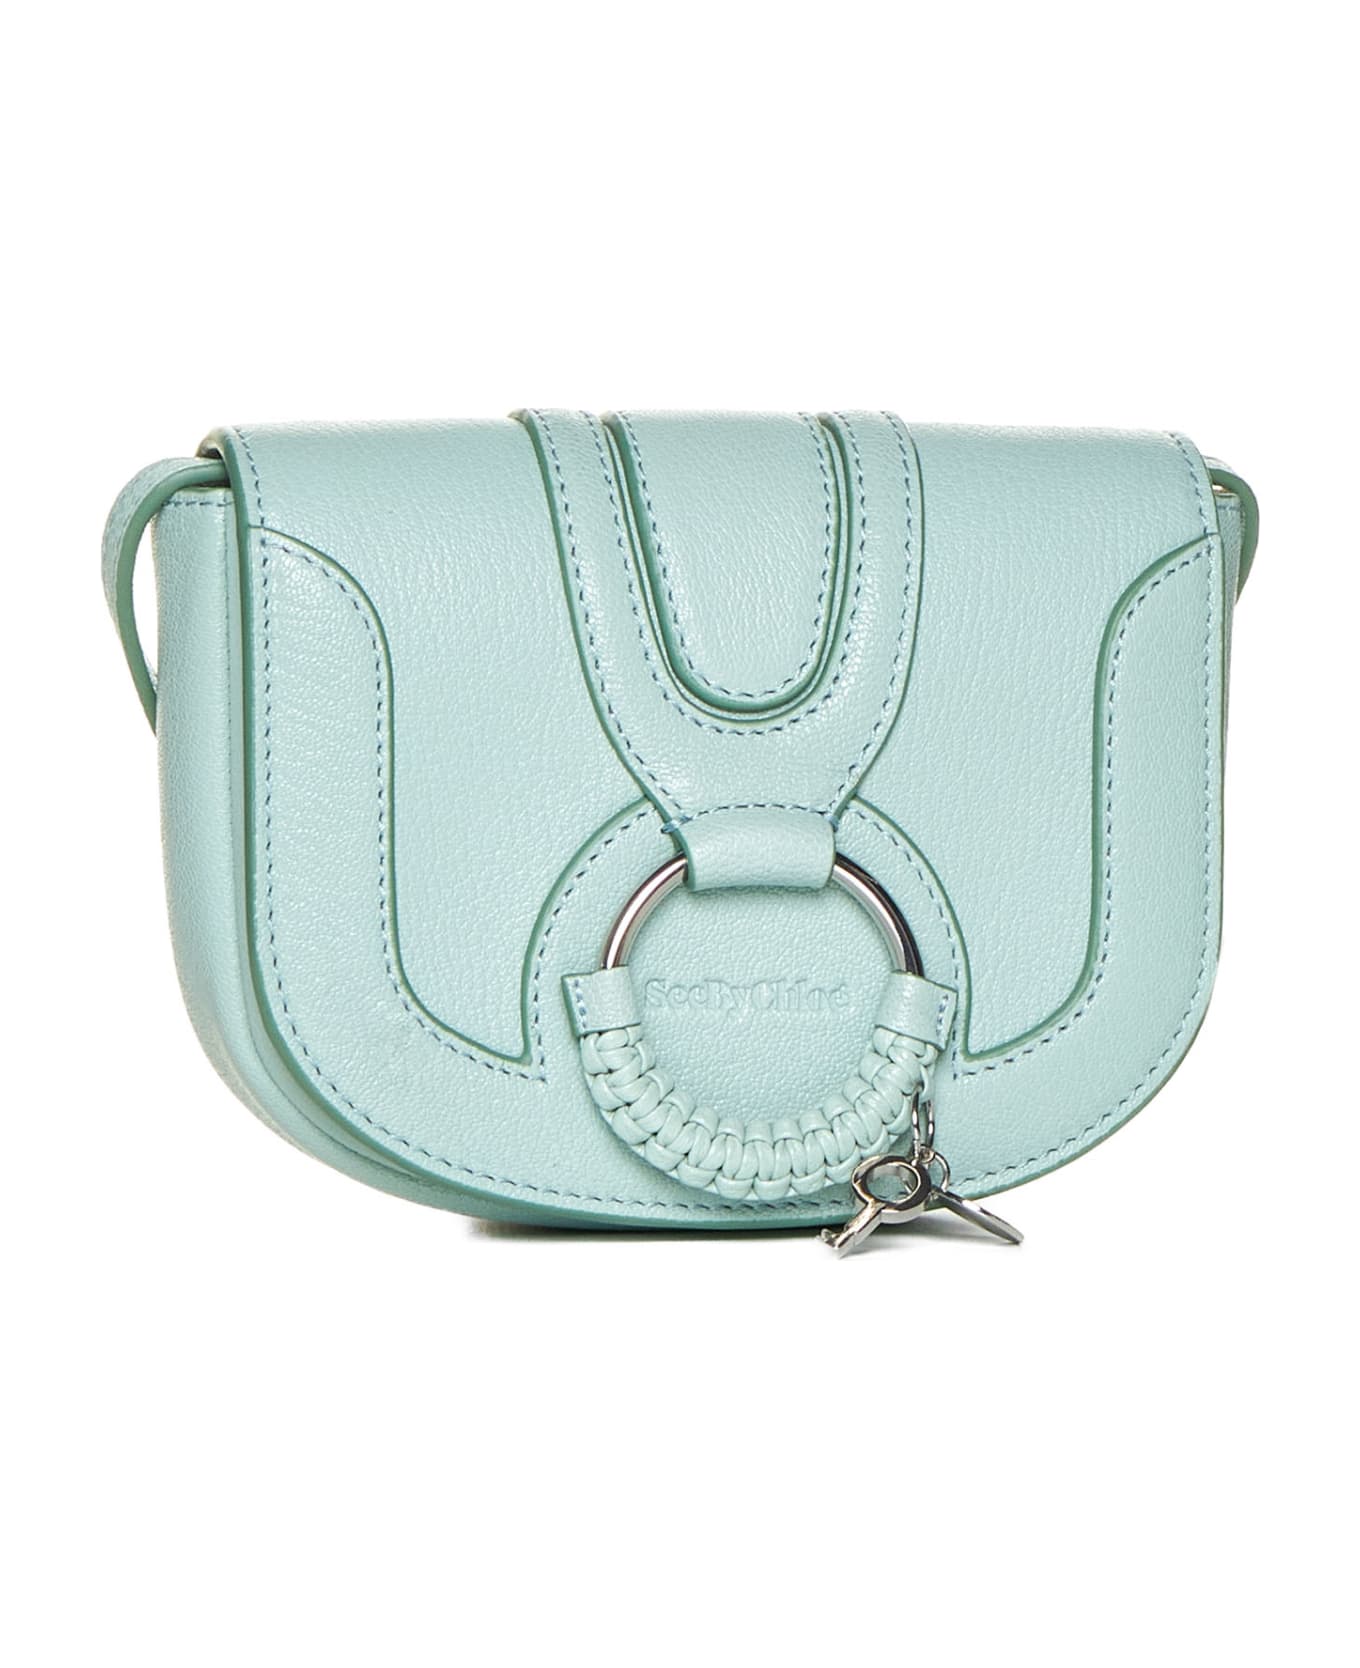 See by Chloé Shoulder Bag - Blowy blue トートバッグ